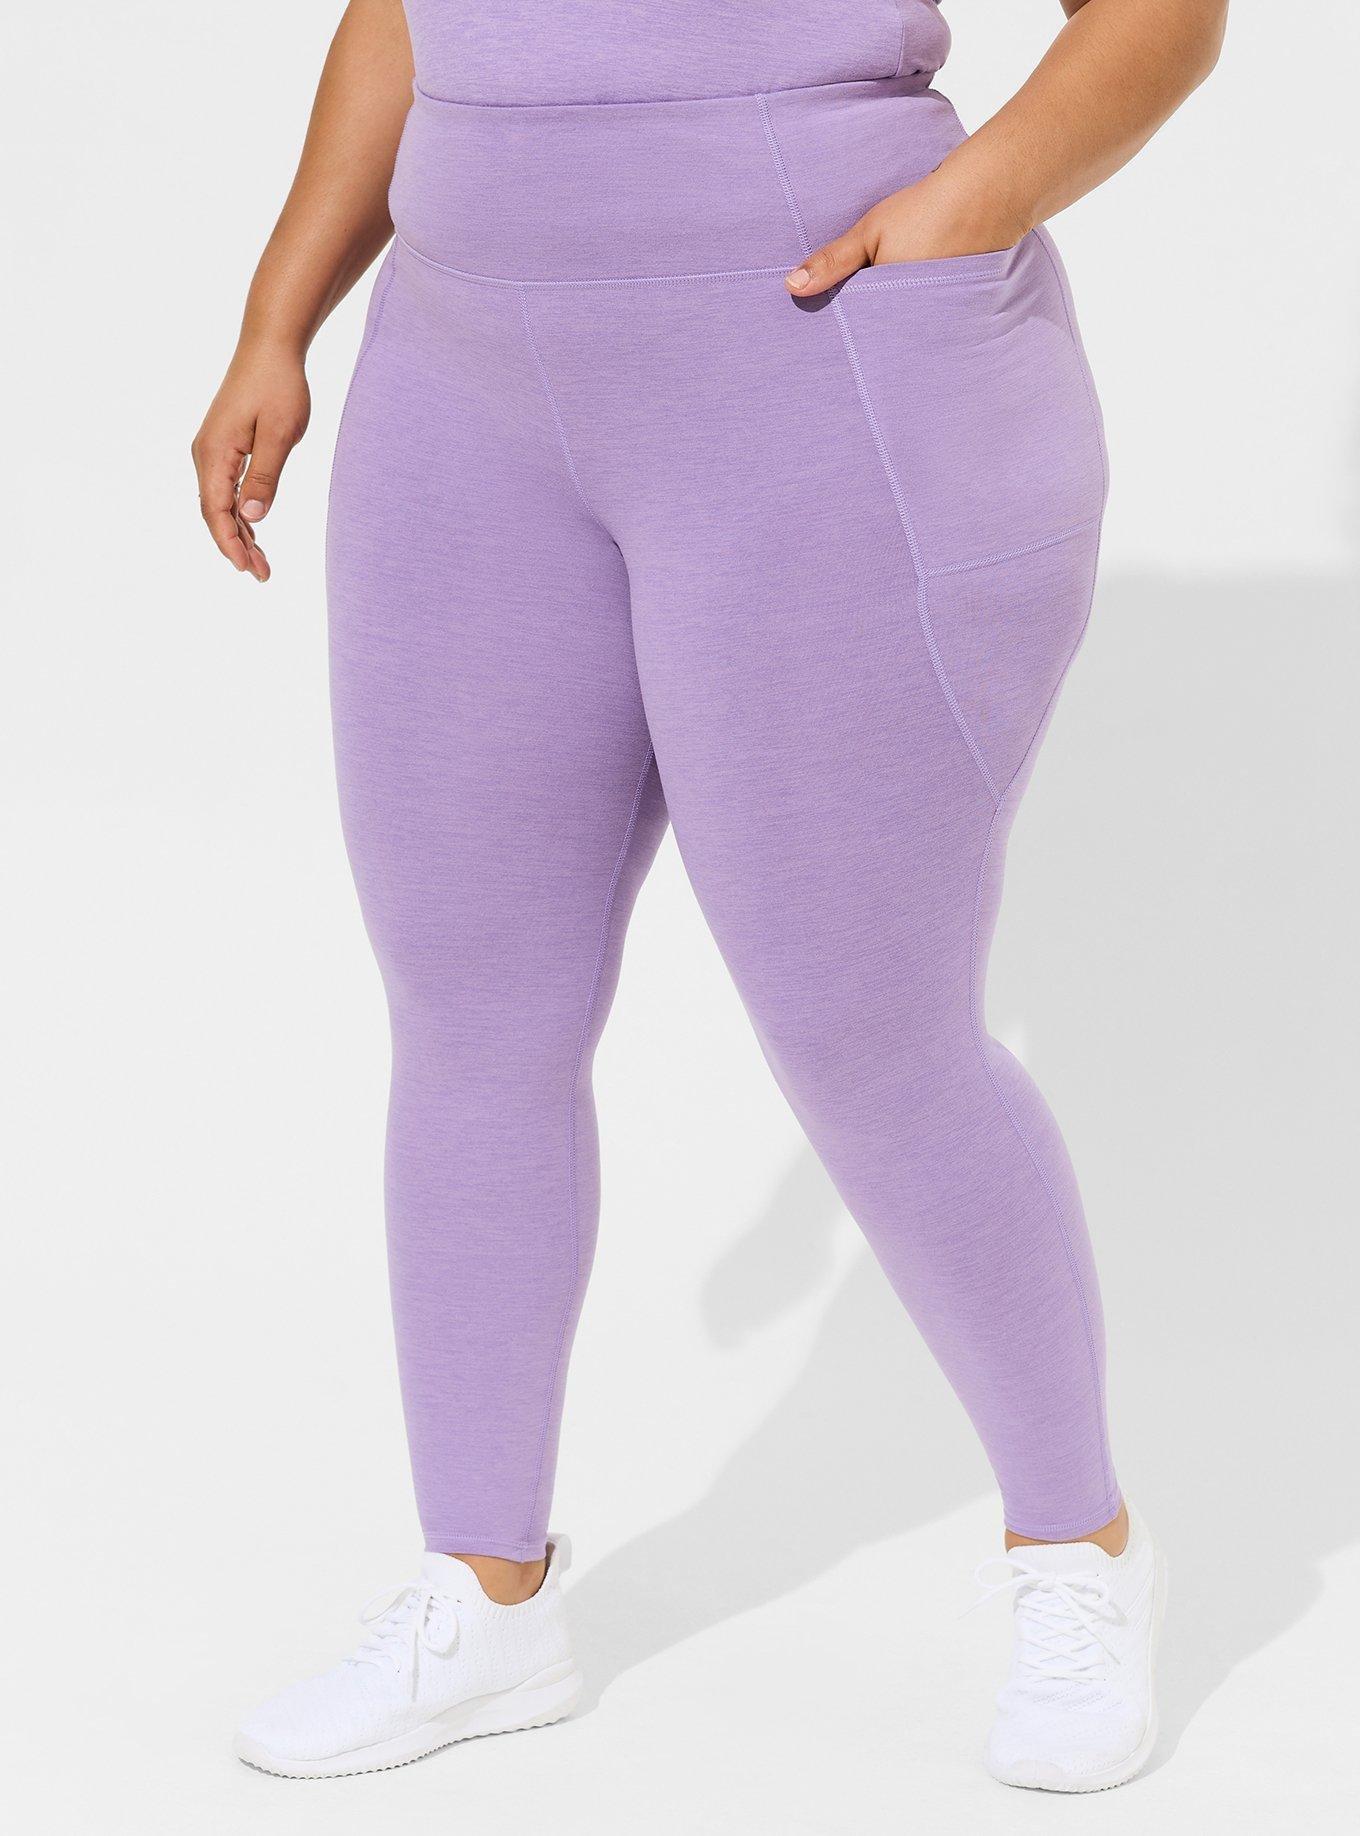 Plus Size - Super Soft Performance Jersey Full Length Active Legging with  Side Pockets - Torrid